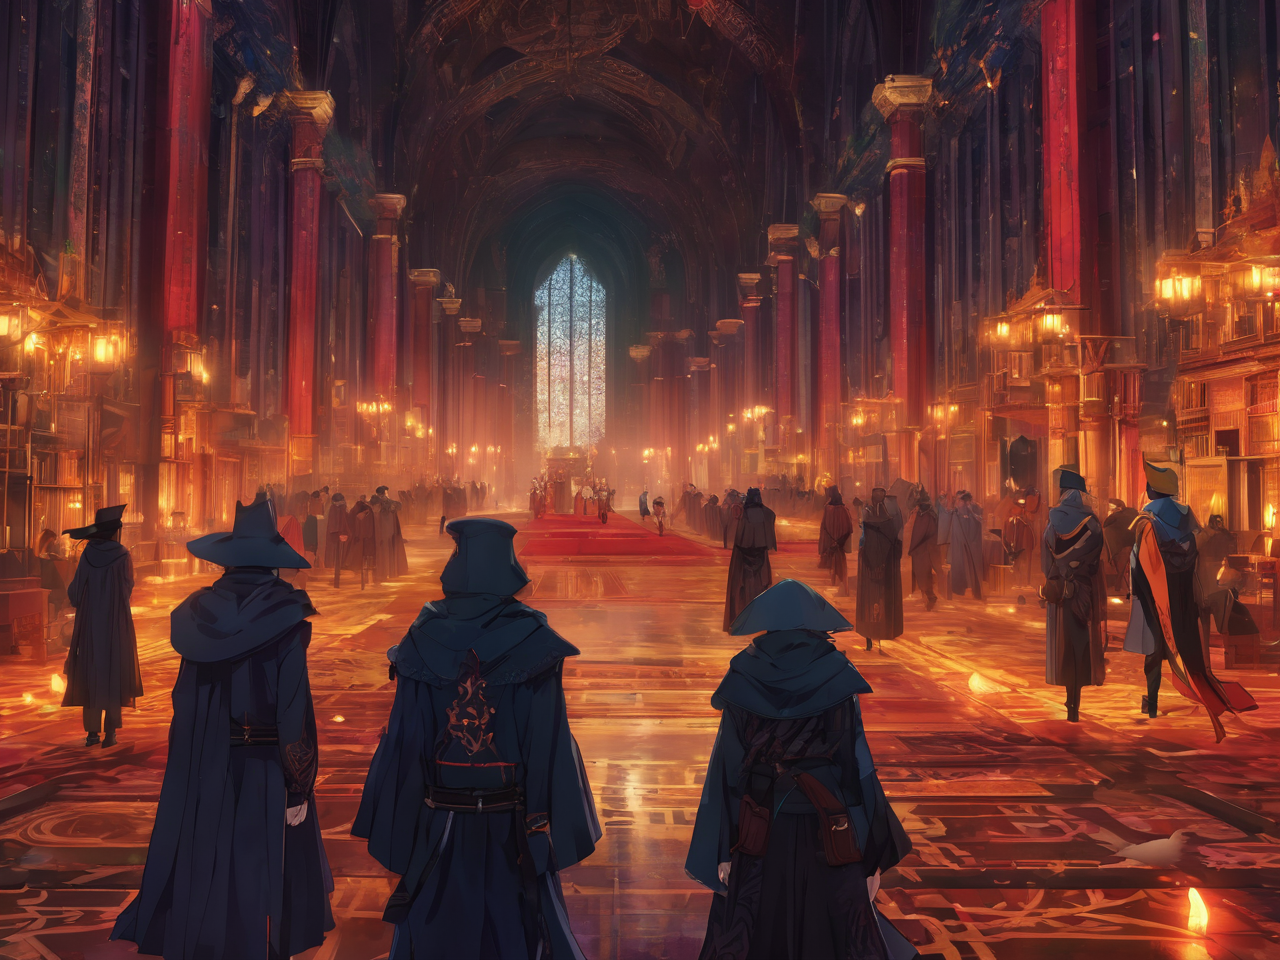 hidden from the eyes of the world, there existed a secret group known as the Conclave of Shadows